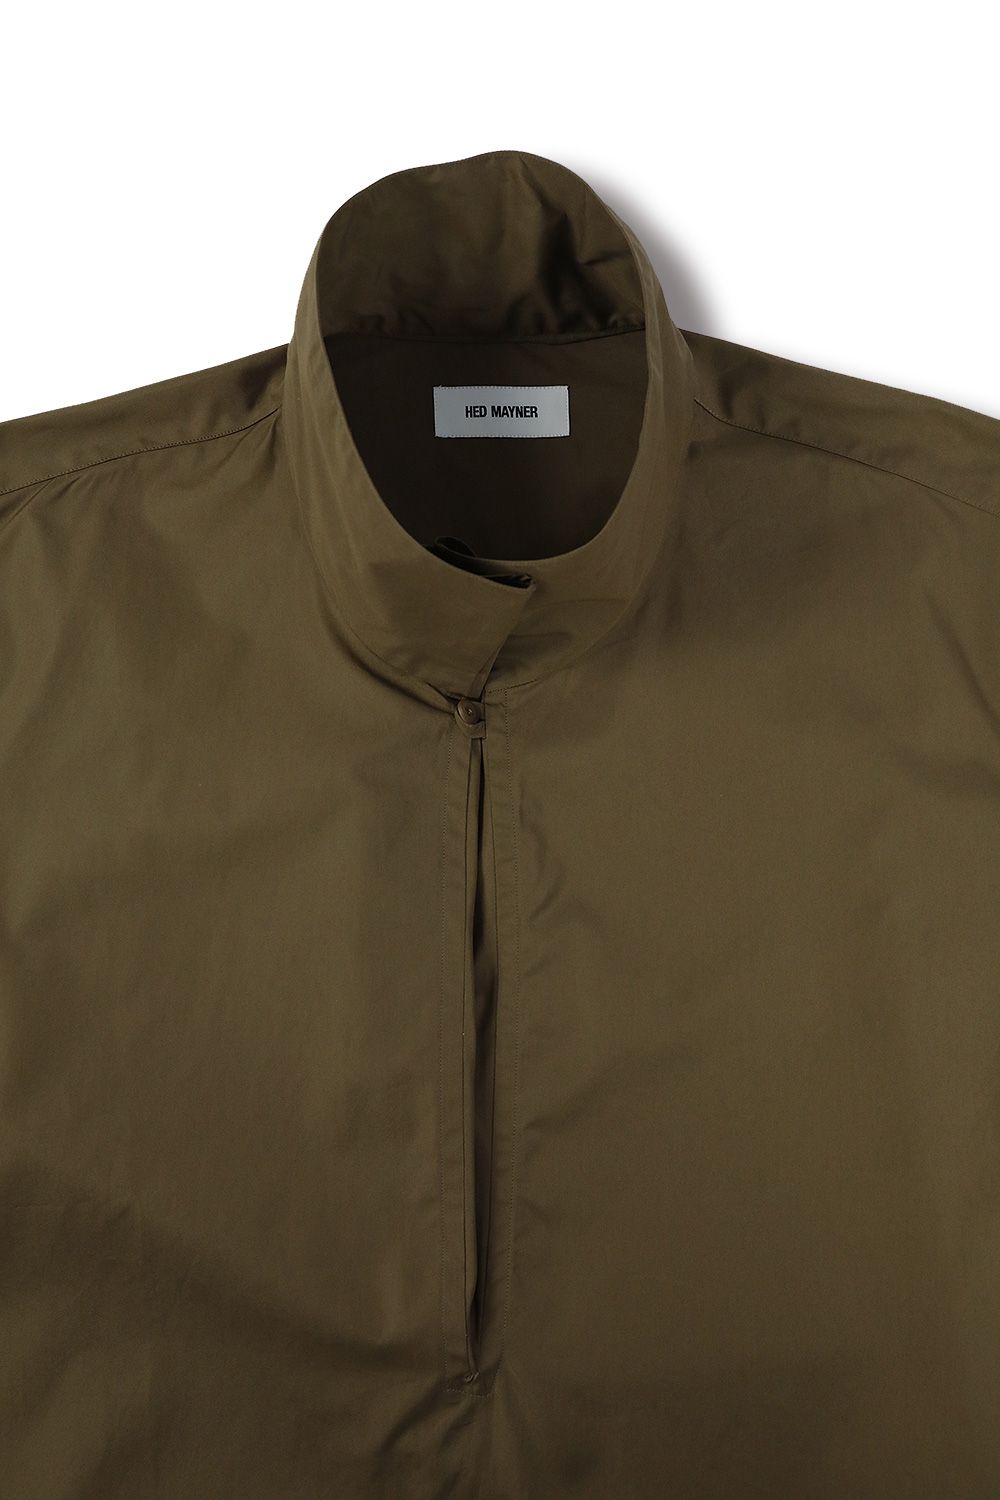 HED MAYNER   ラスト1点EXTENDED COLLAR SHIRTBROWN   Acacia